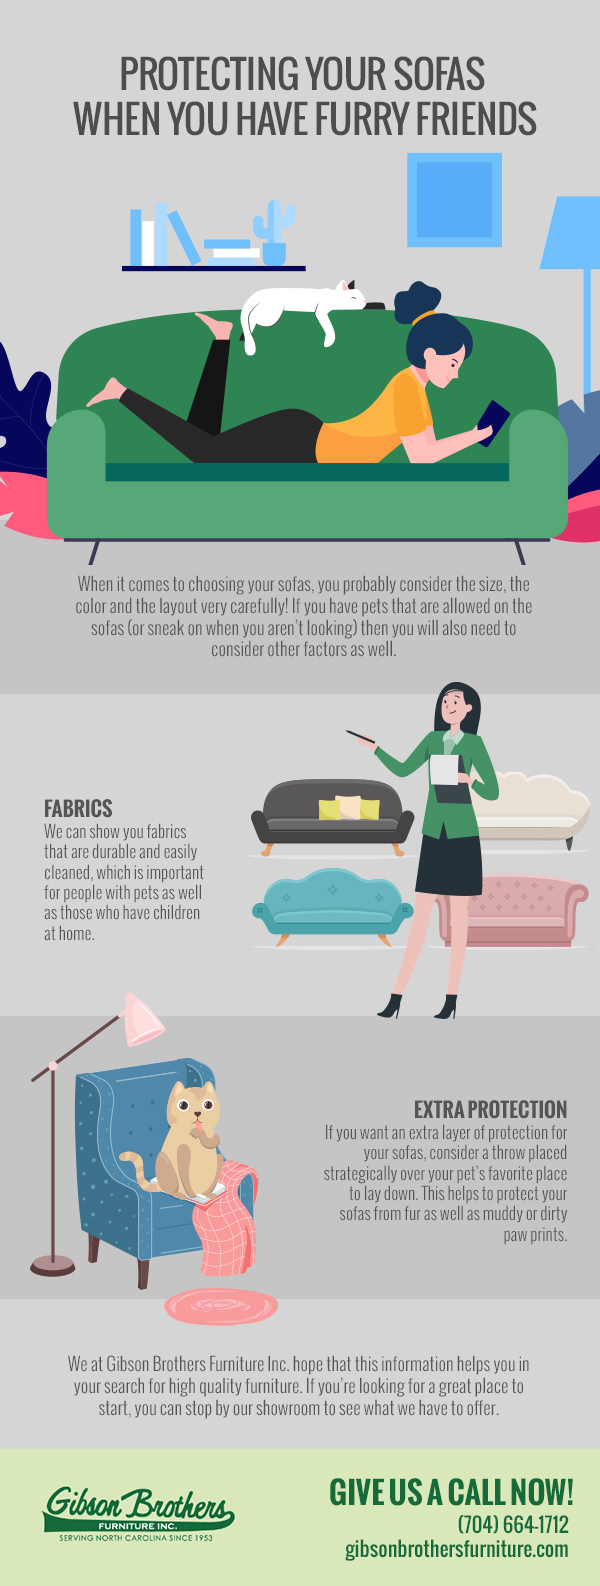 Protecting Your Sofas When You have Furry Friends [infographic]